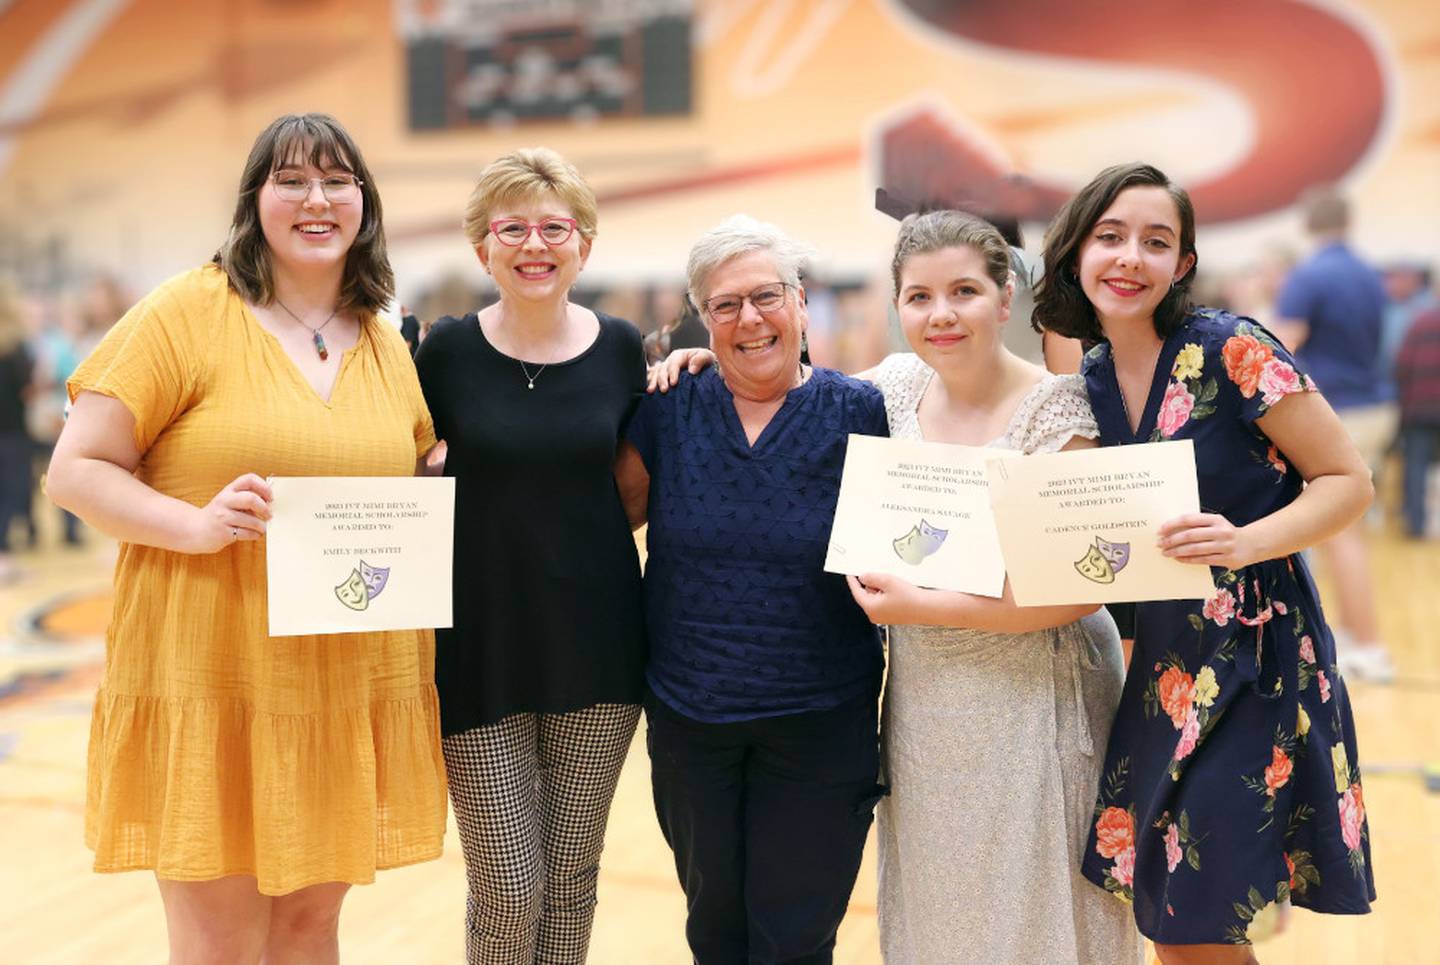 Pictured from left are scholarship recipient Emily Beckwith, IVT Mimi Bryan Scholarship Committee member Kari Frantzen, IVT Mimi Bryan Scholarship Committee chair Sharon Pagoria, and scholarship recipents Aleksandra Savage and Cadence Goldstein at  Sandwich High School's Senior Awards Night.